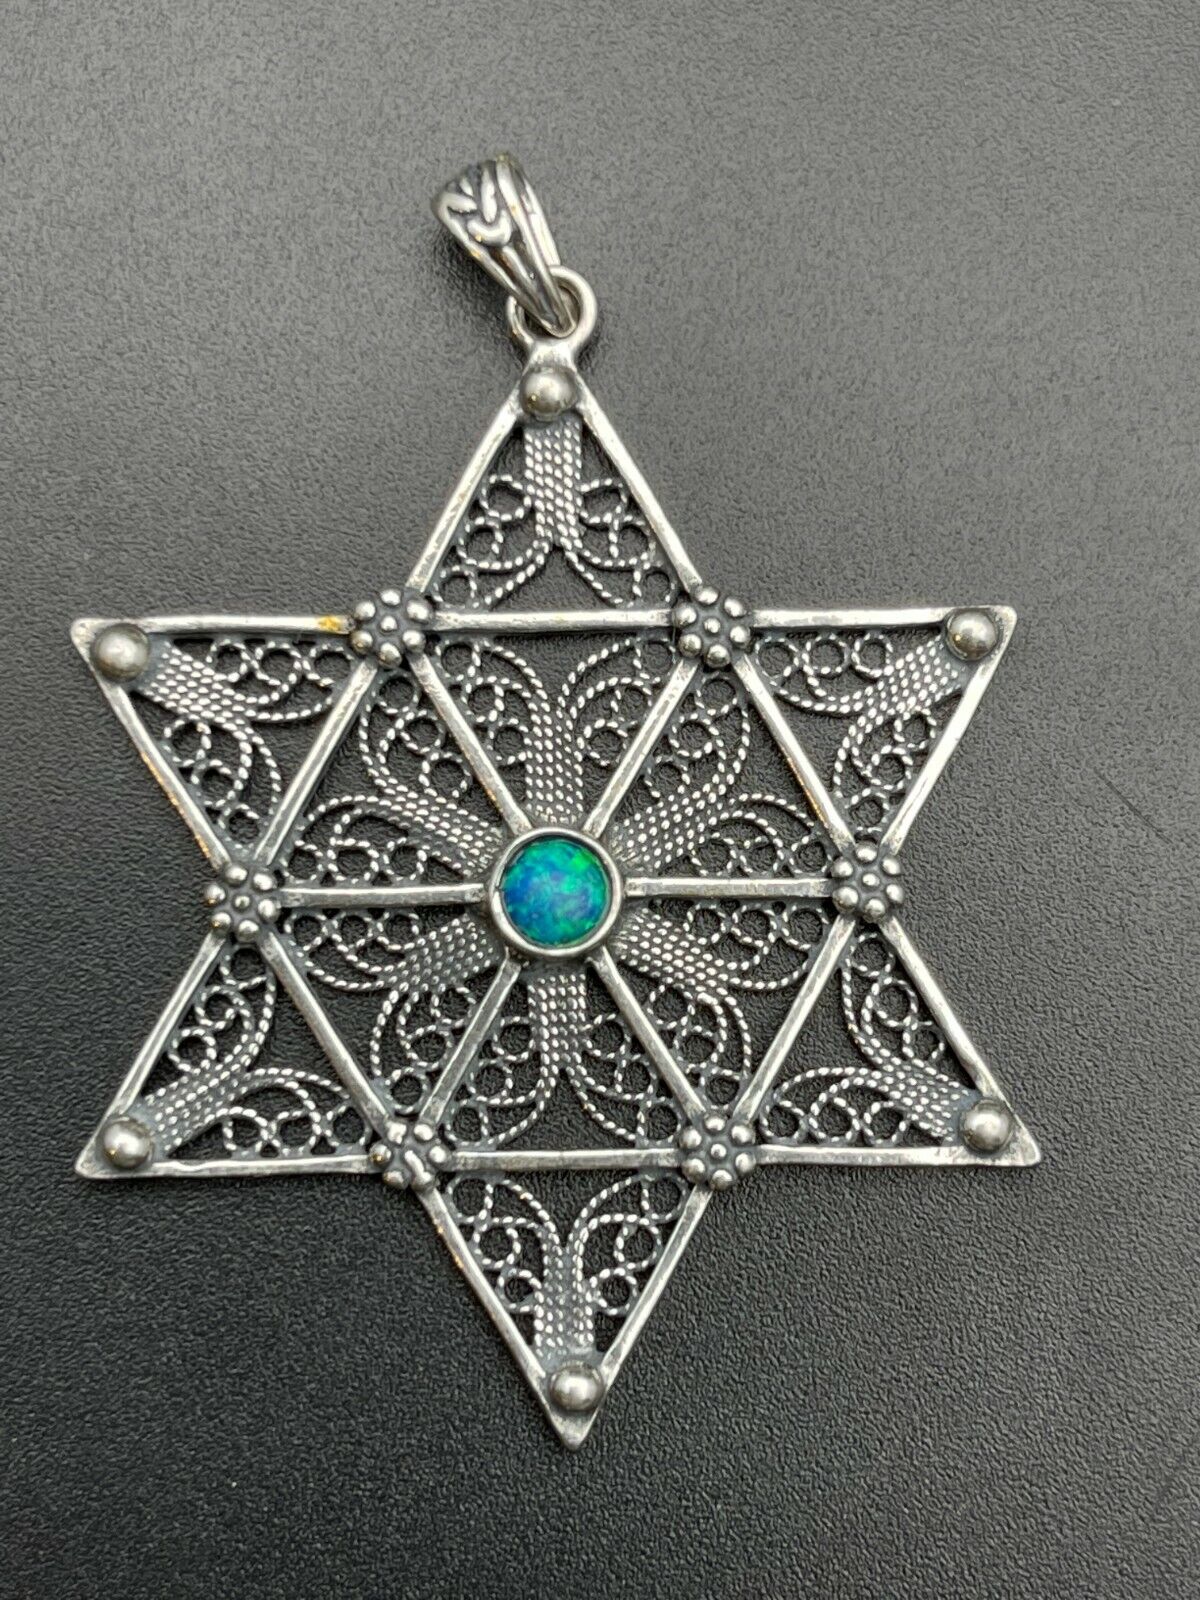 Magen Star of David Large Pendant Silver 925 Filigree & Opal Necklace Charm